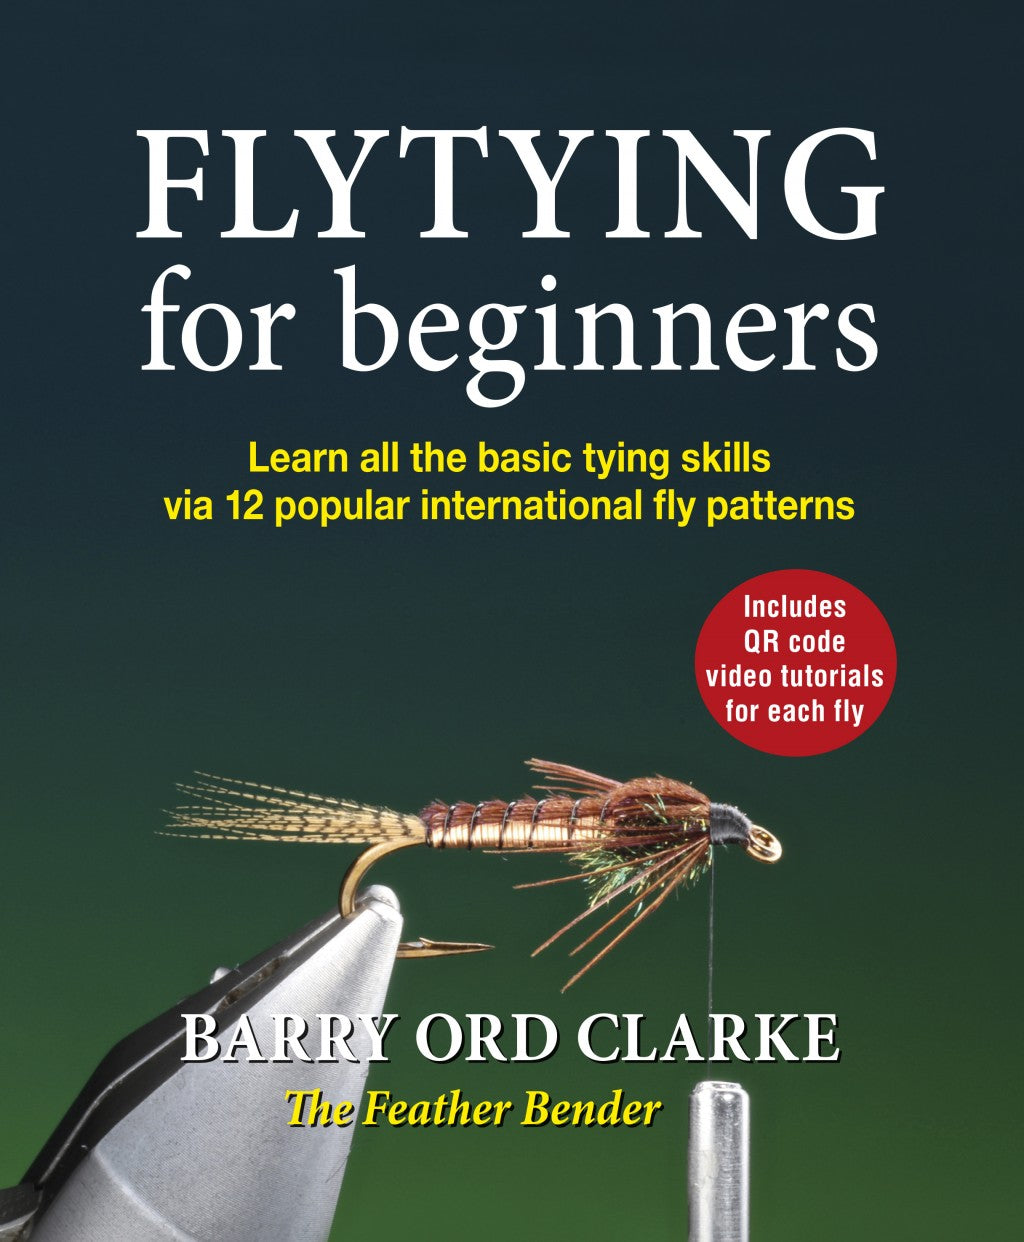 Flytying for beginners by Barry Ord Clarke